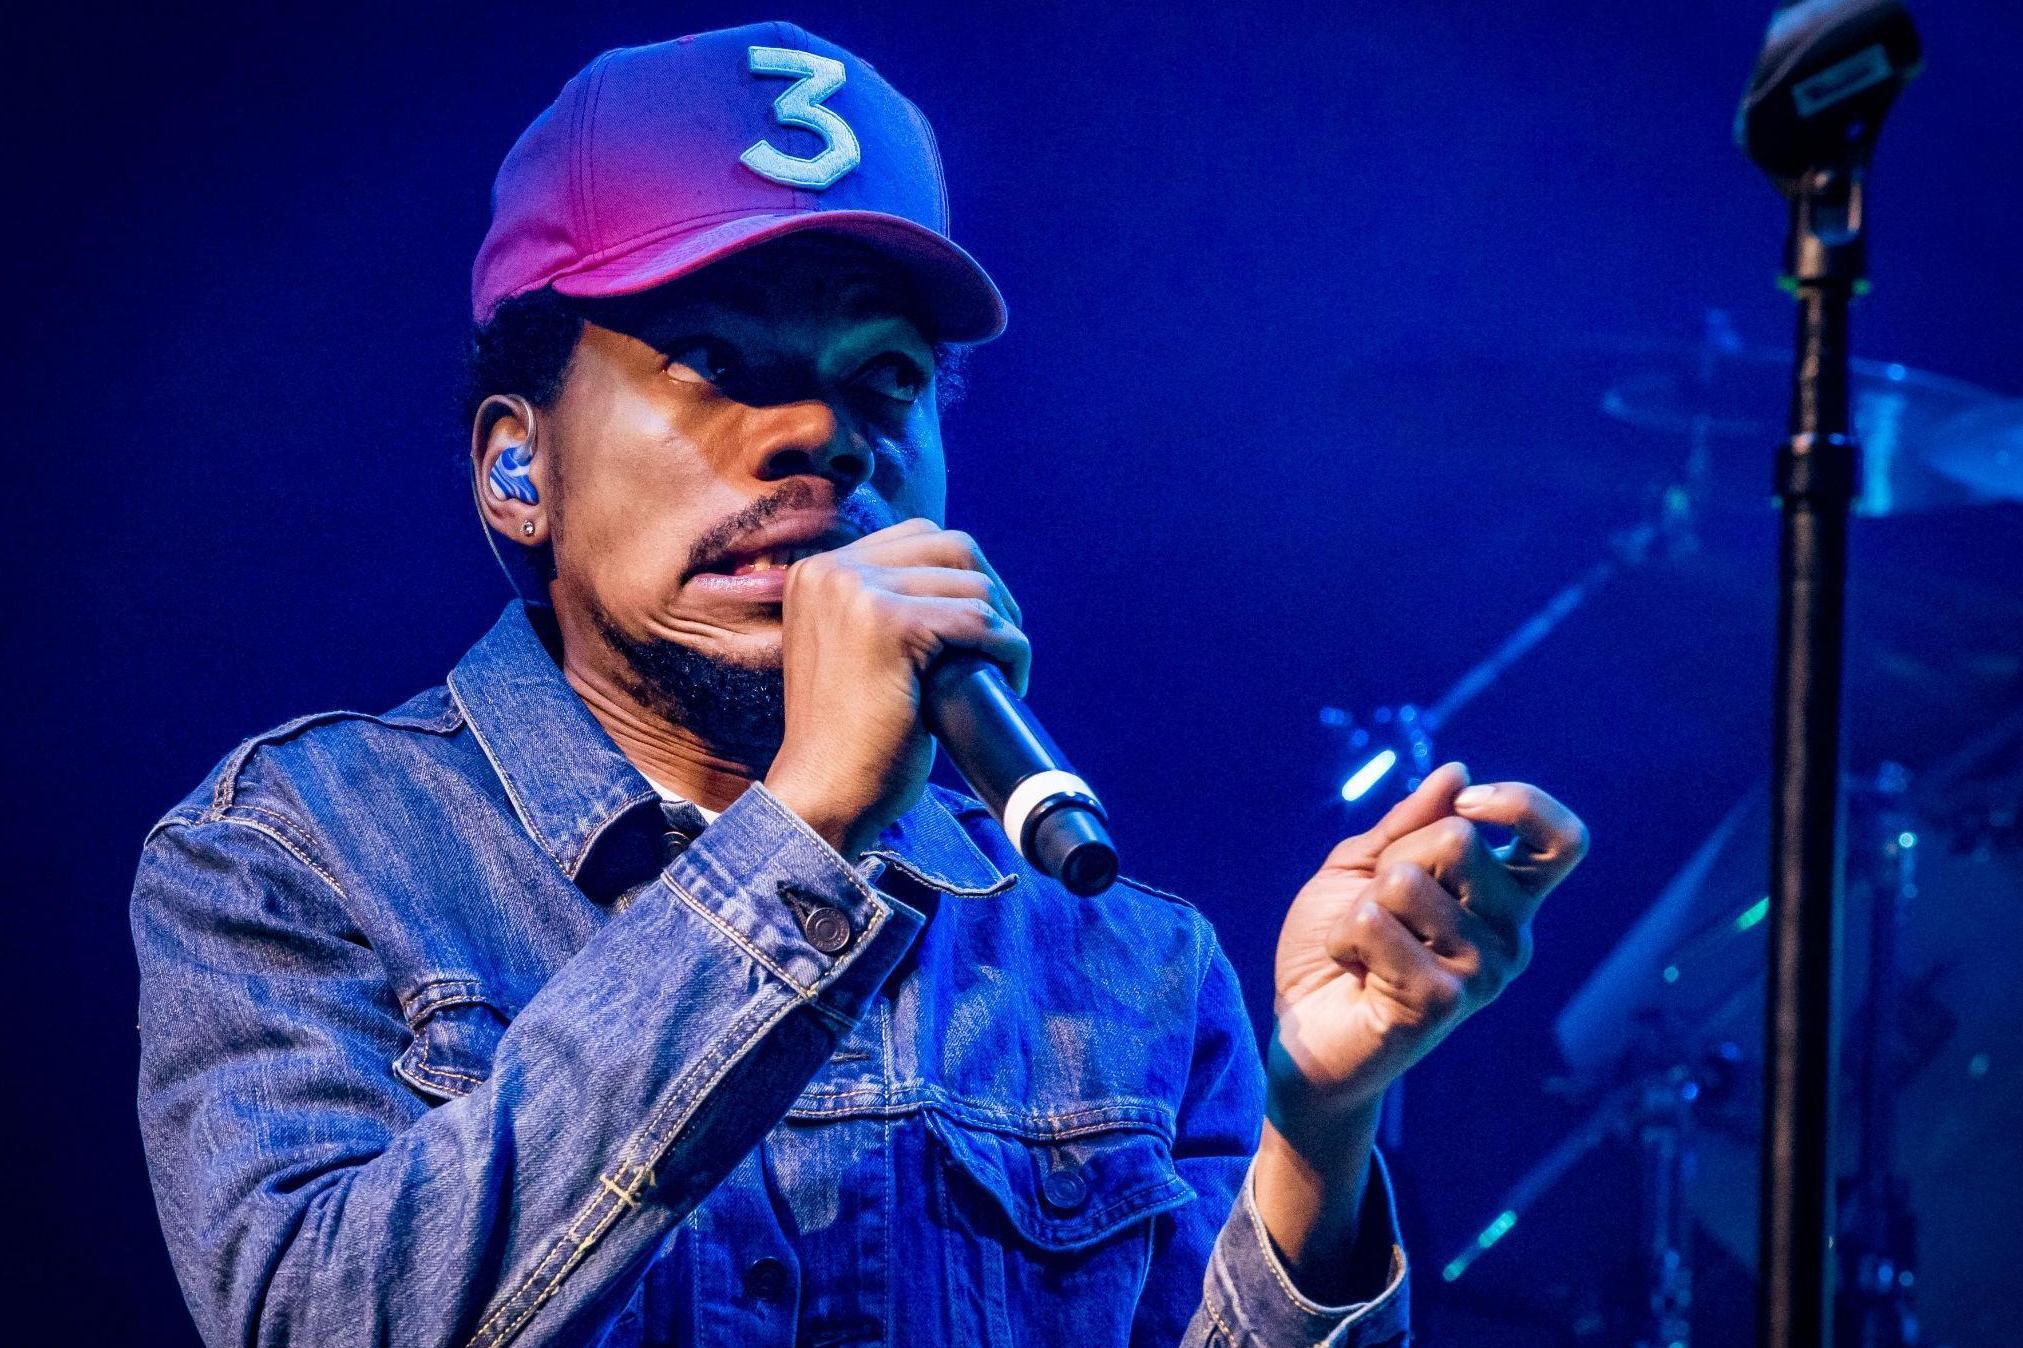 Chance the Rapper is here to help